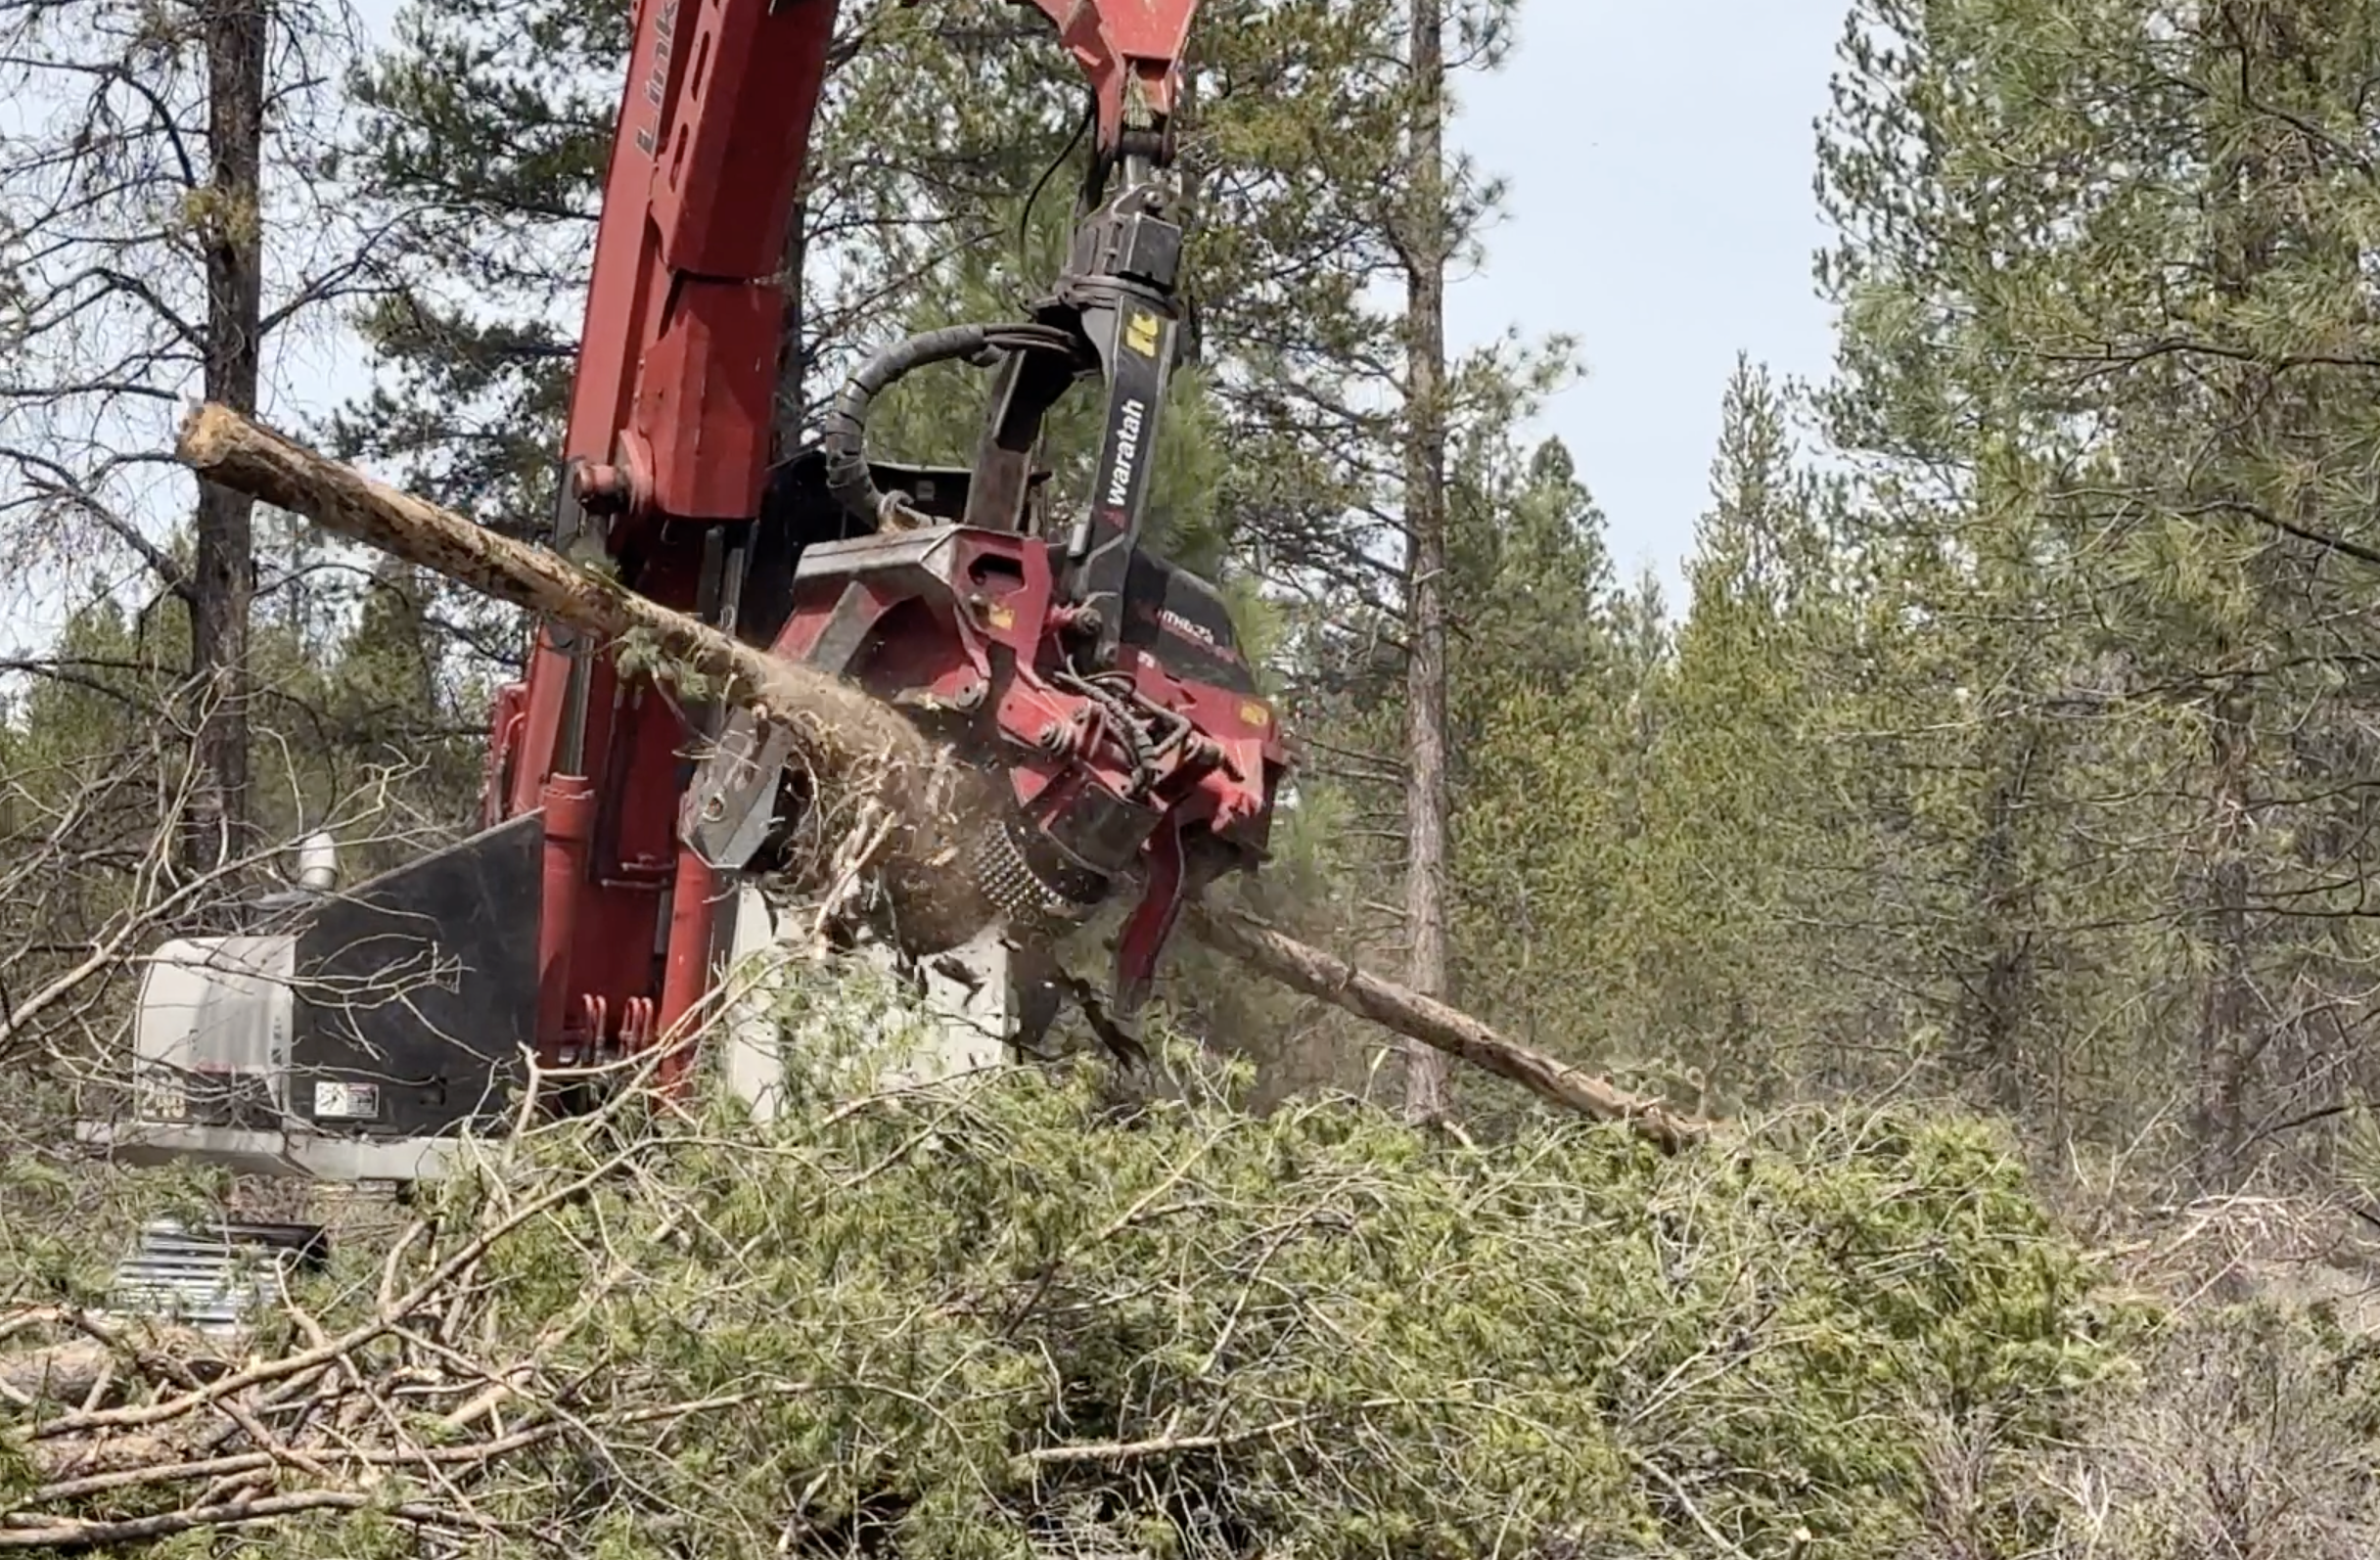 A excavator with a processor head moves a tree in the forest